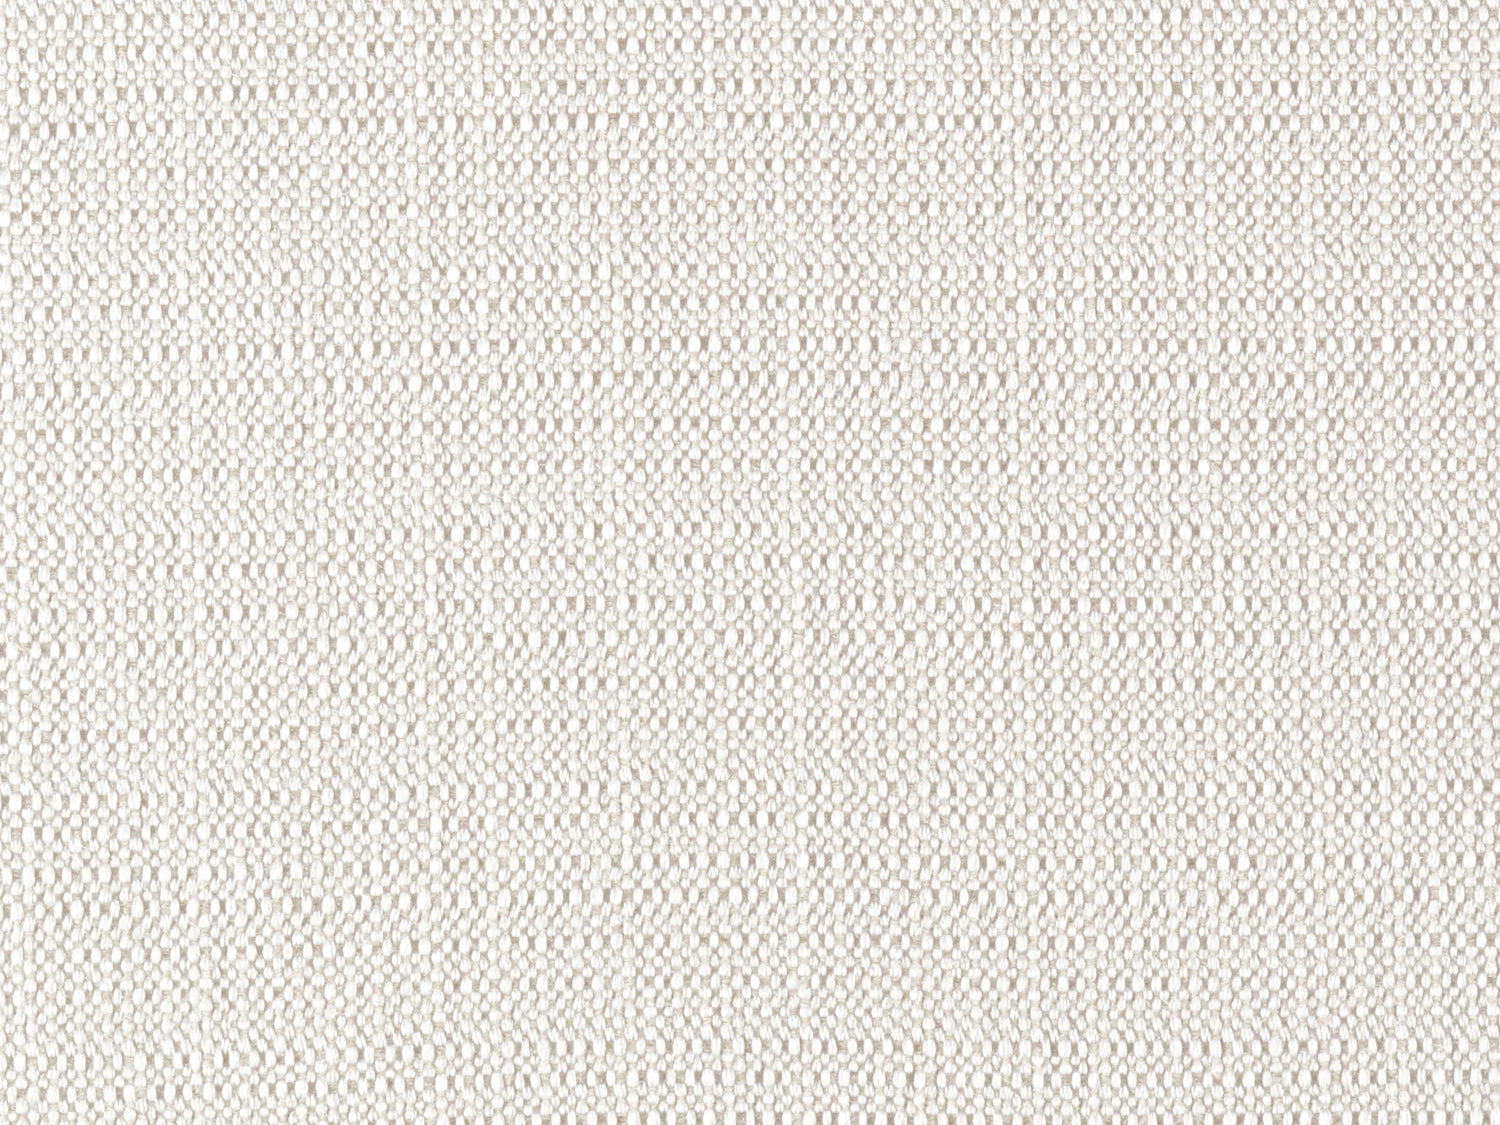 Crestmoor fabric in almond color - pattern number WR 00063014 - by Scalamandre in the Old World Weavers collection